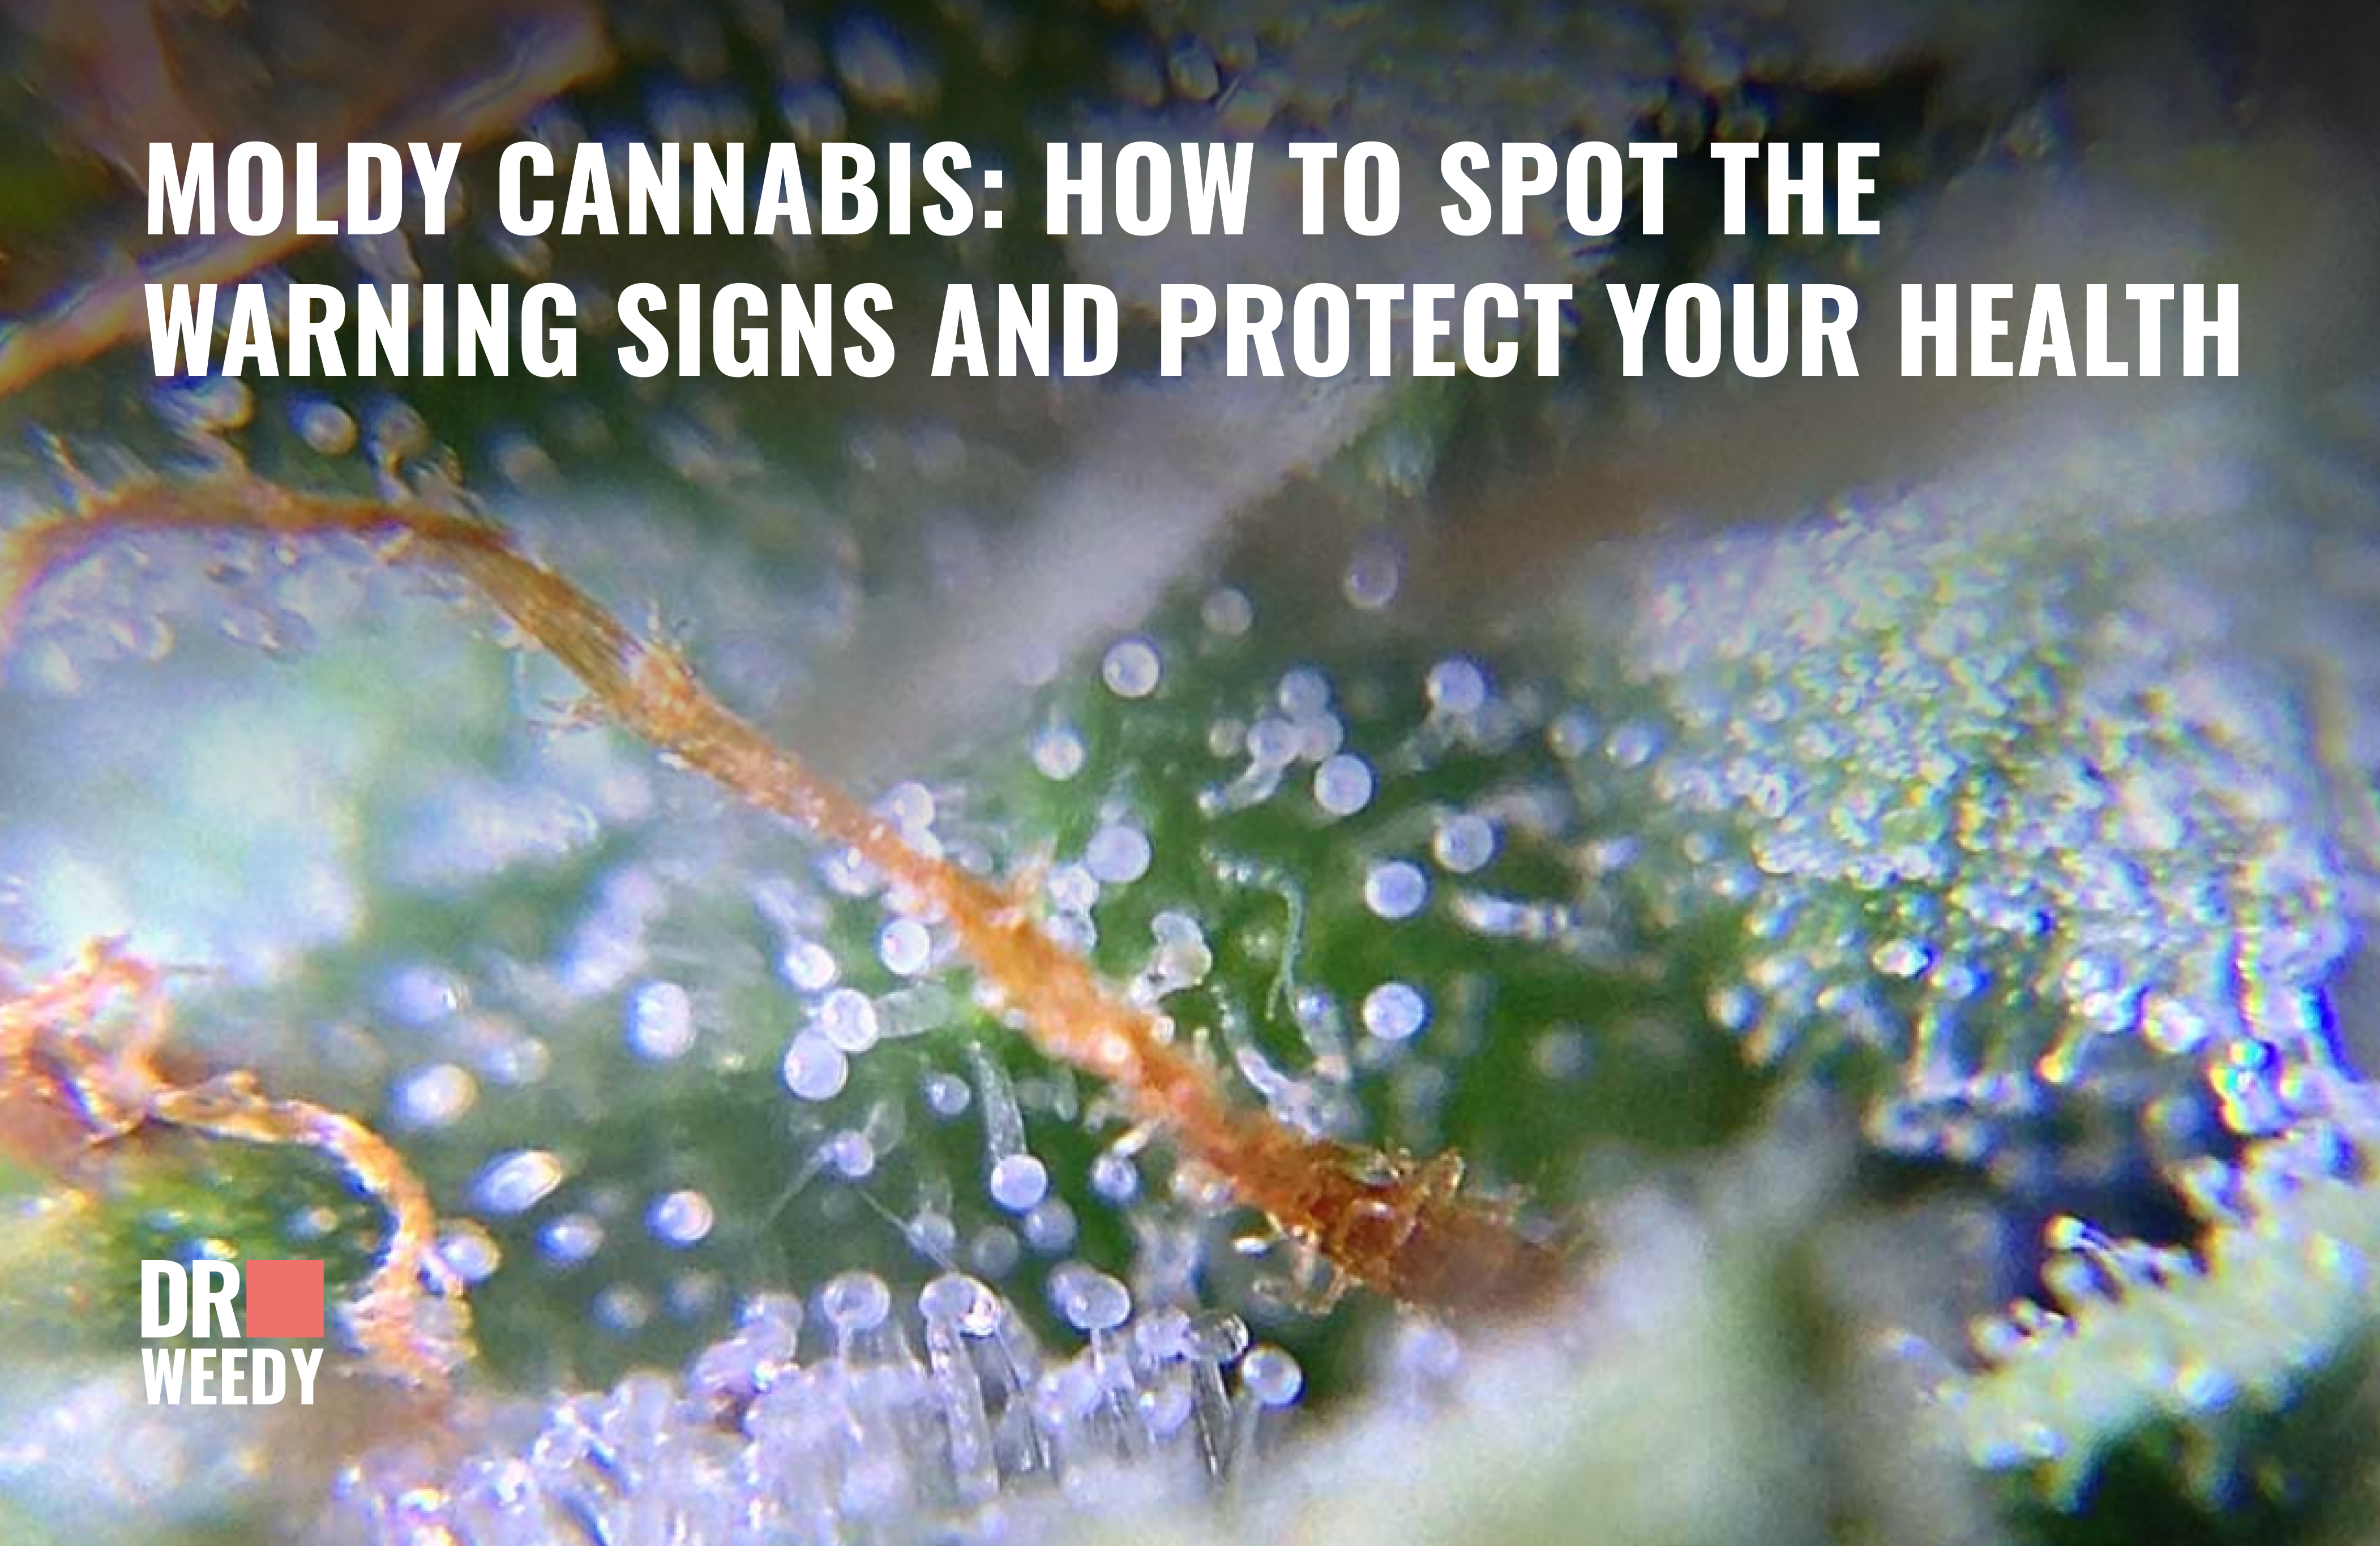 Moldy Cannabis: How to Spot the Warning Signs and Protect Your Health